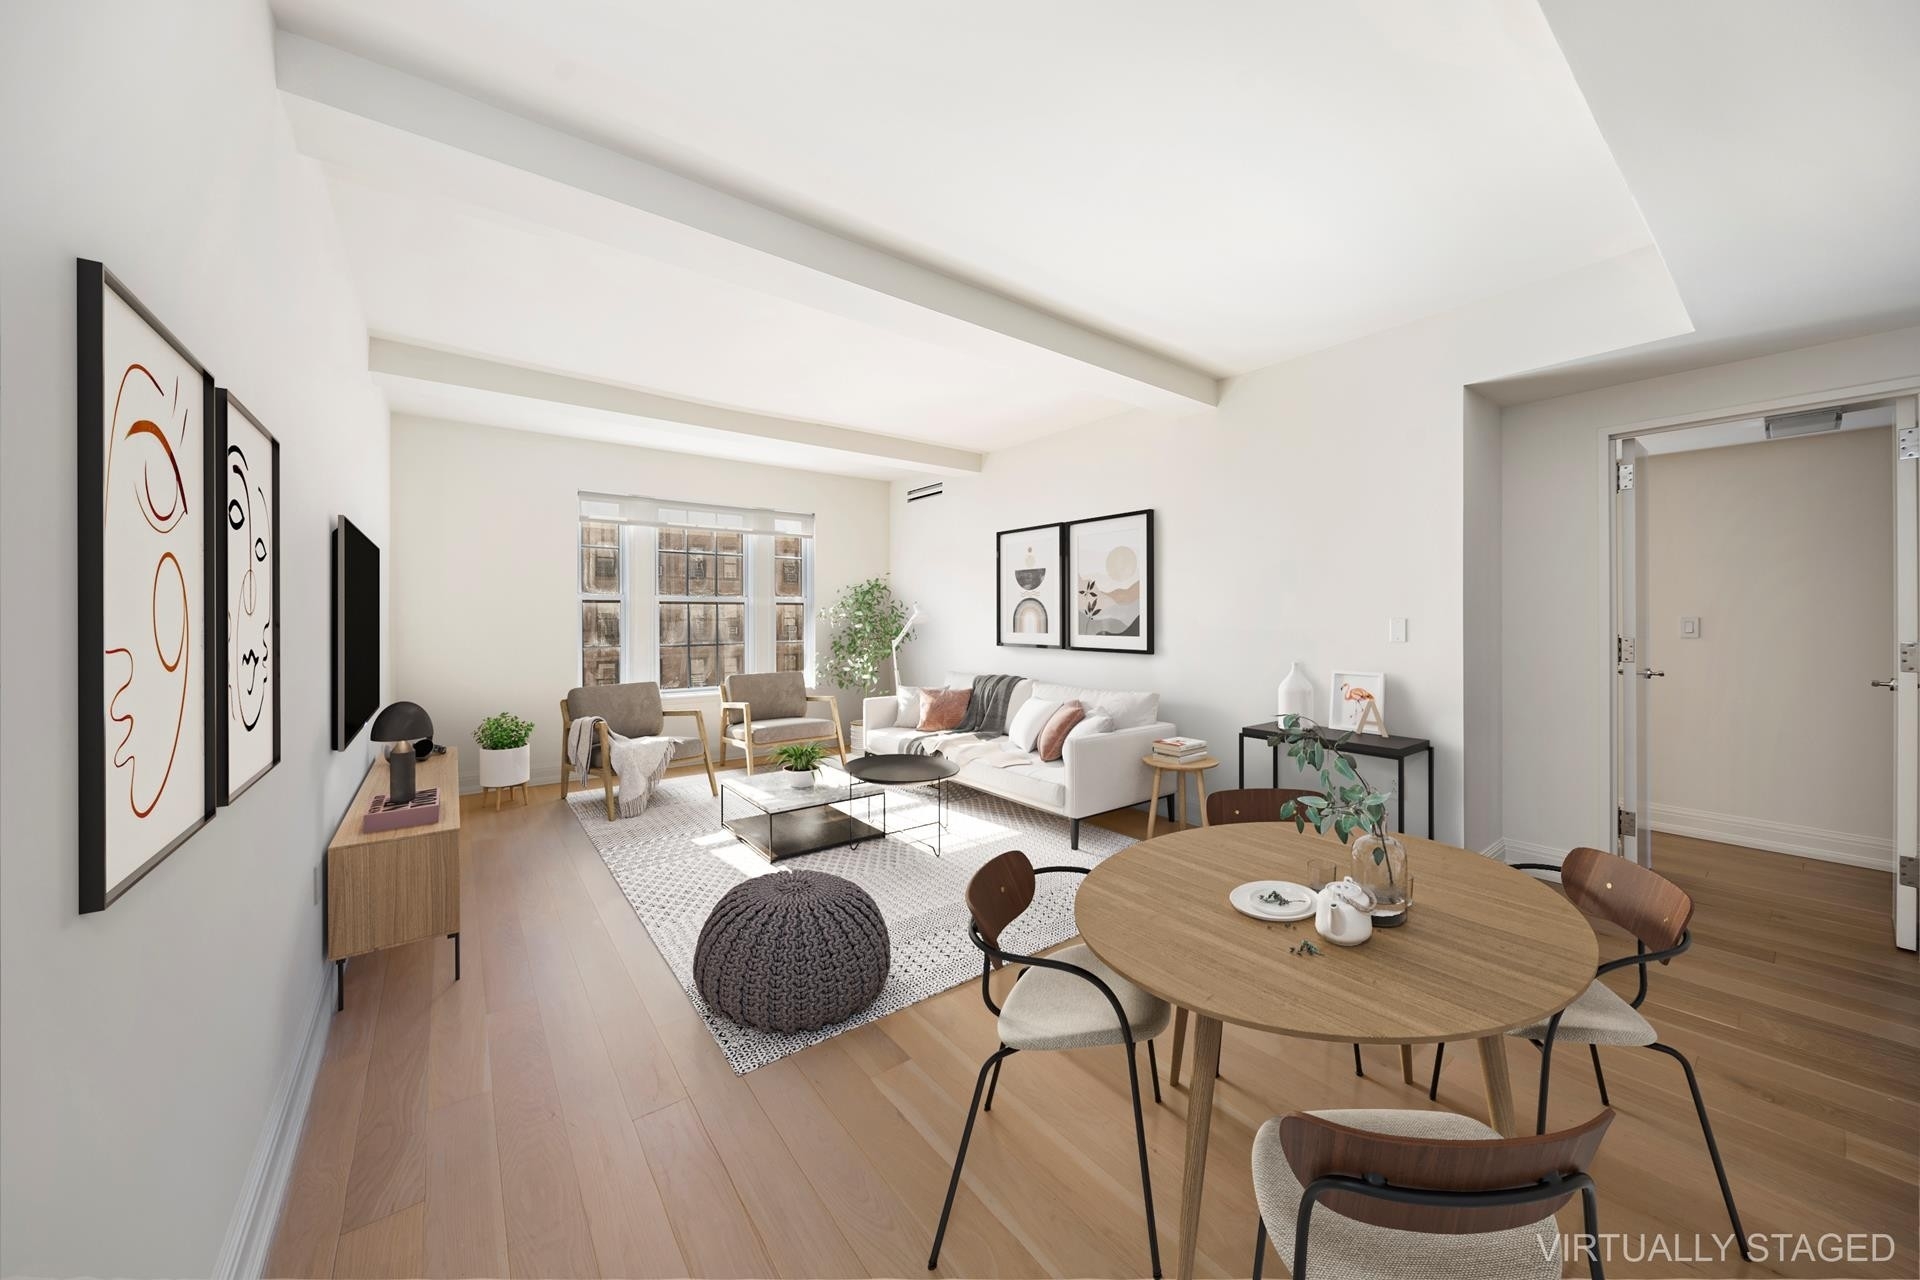 Condominium for Sale at Brewster, 21 W 86TH ST, 14D Upper West Side, New York, New York 10024